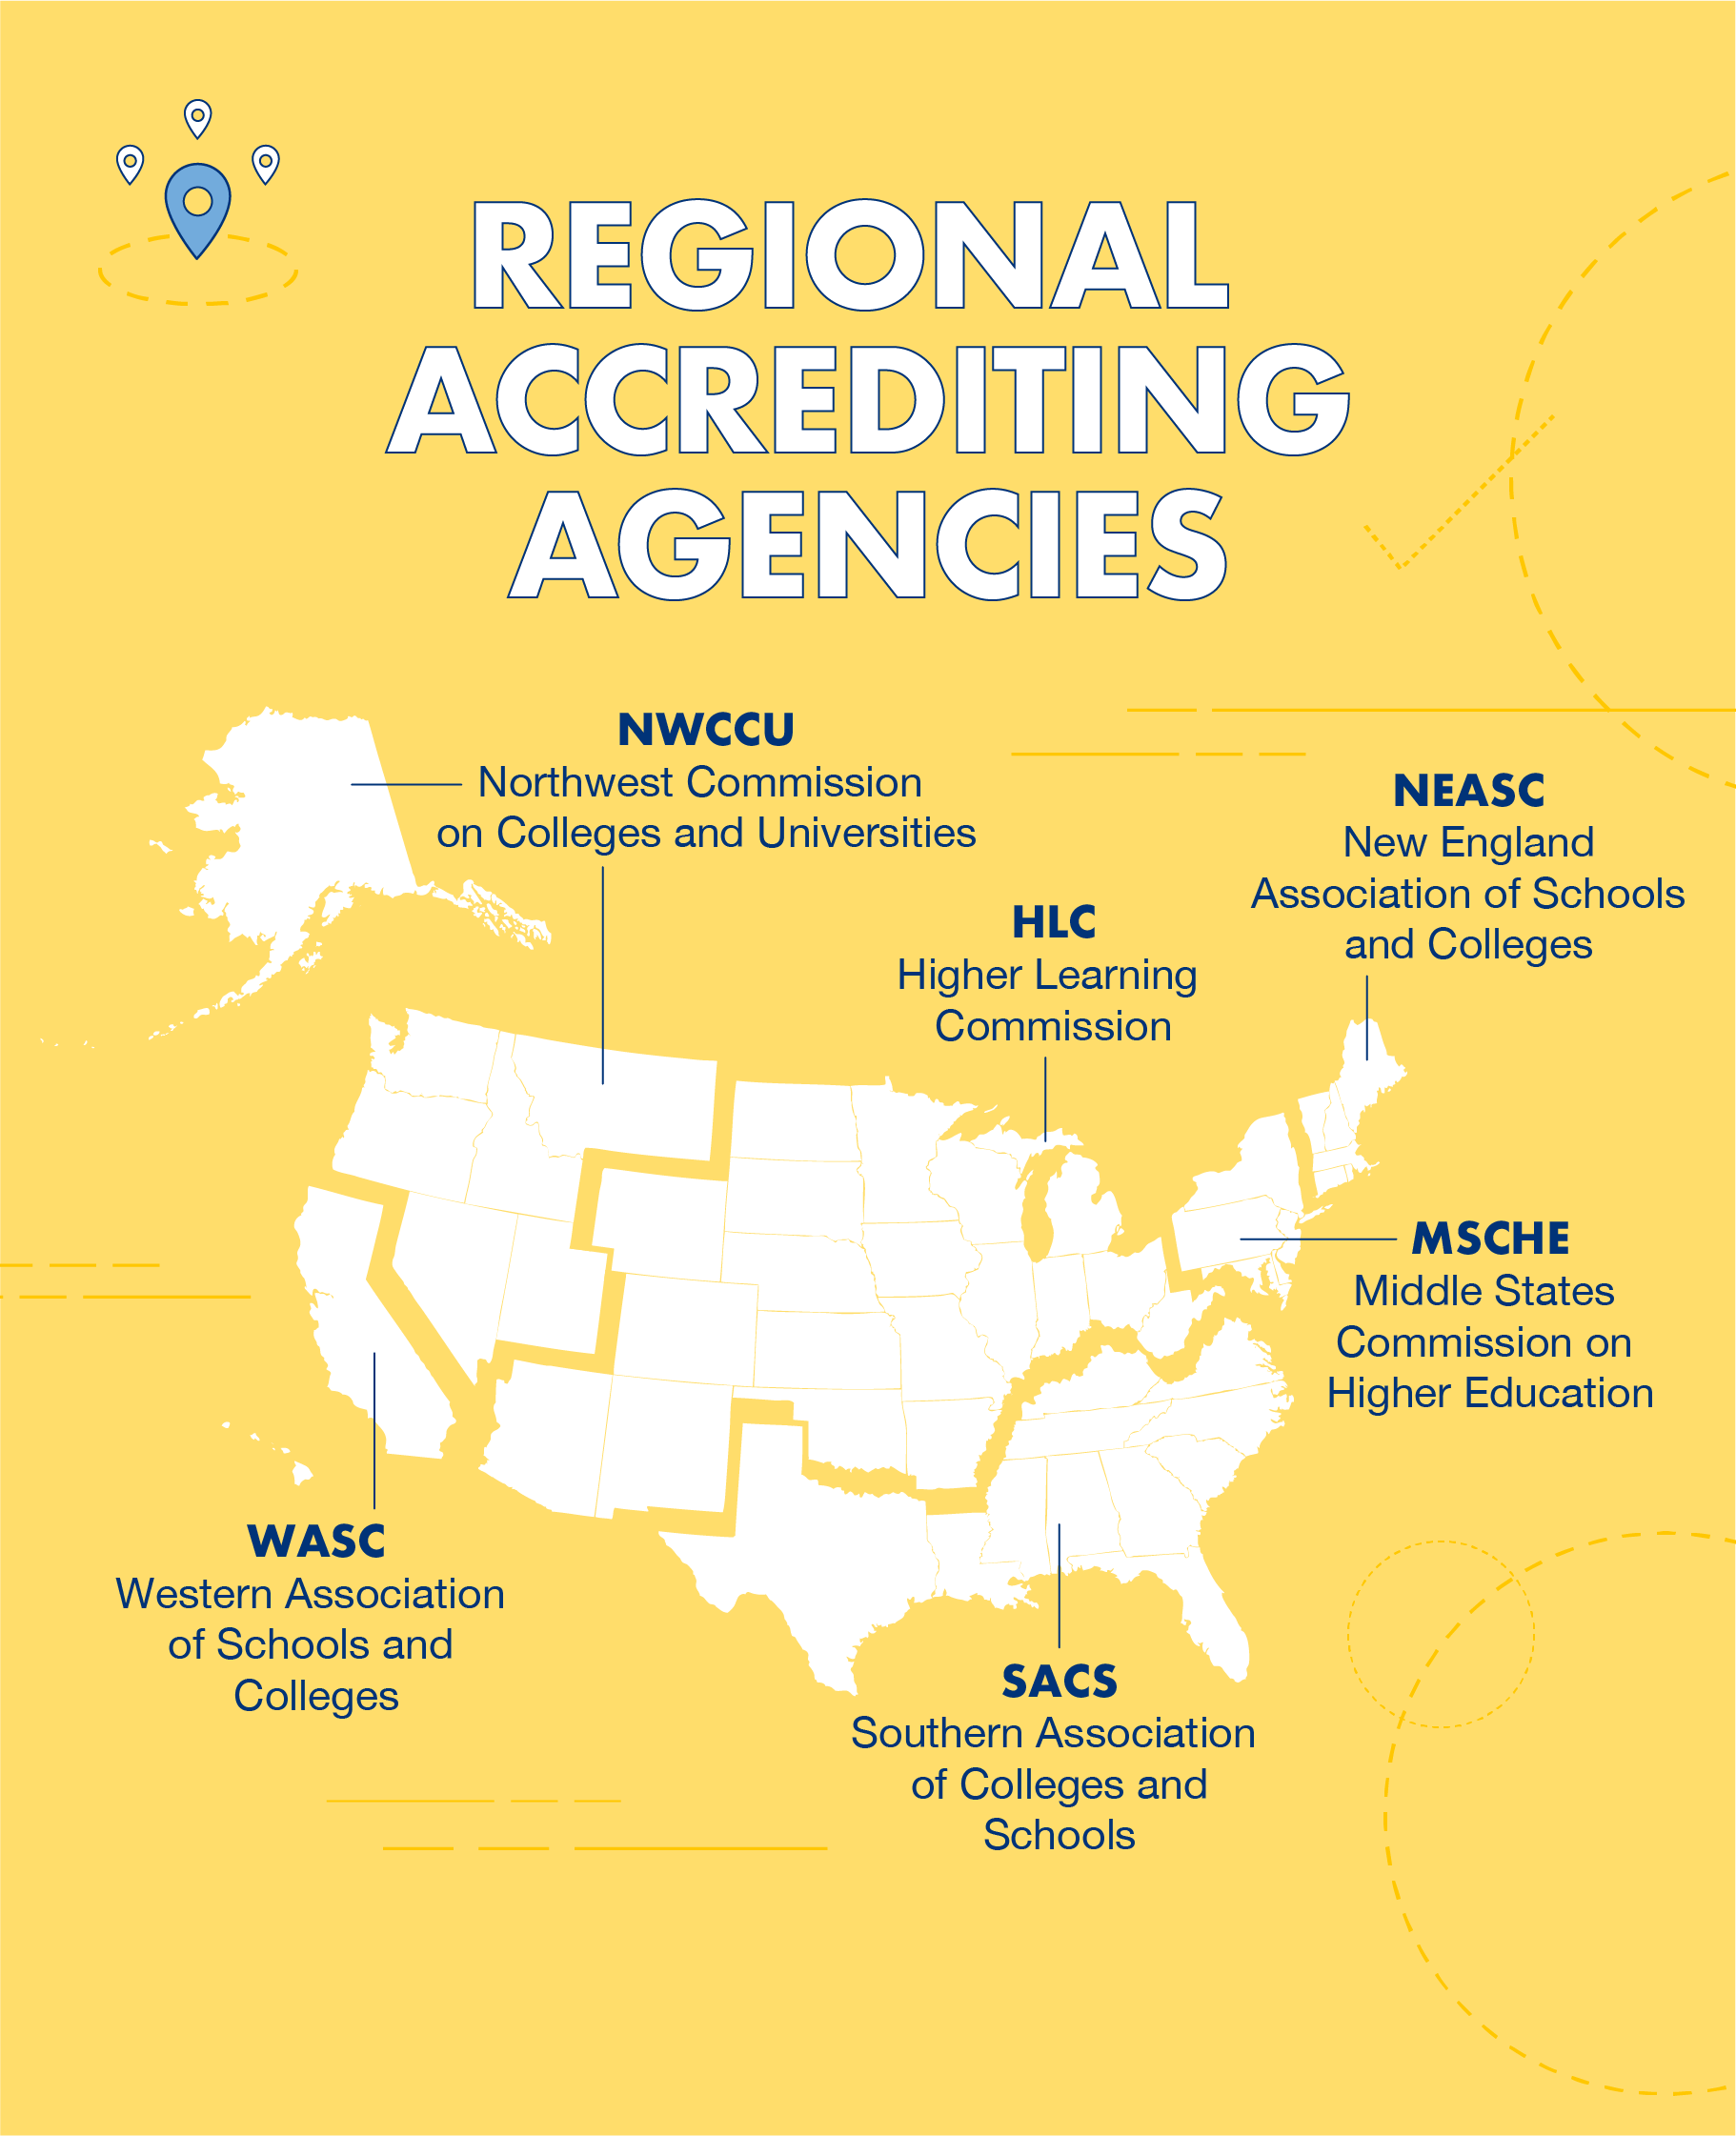 There are six regional accrediting agencies for higher education in the U.S.